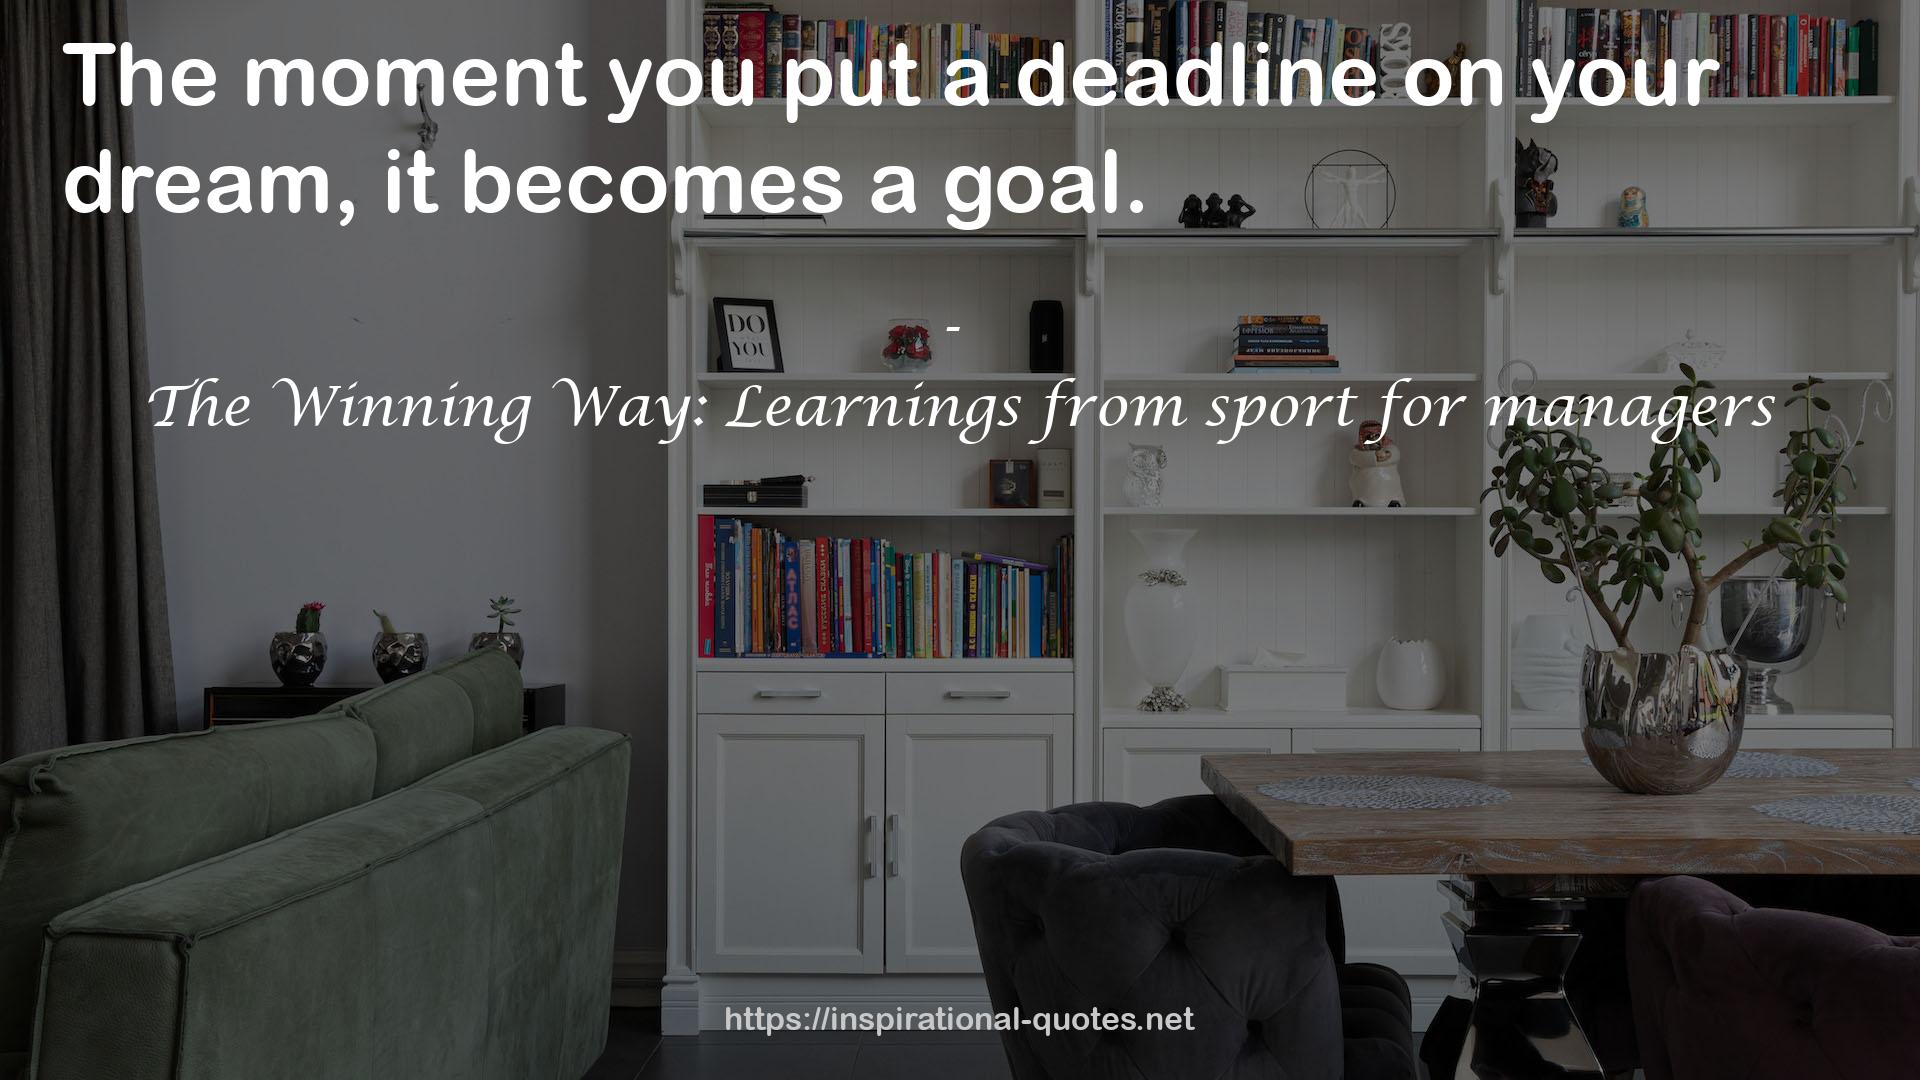 The Winning Way: Learnings from sport for managers QUOTES